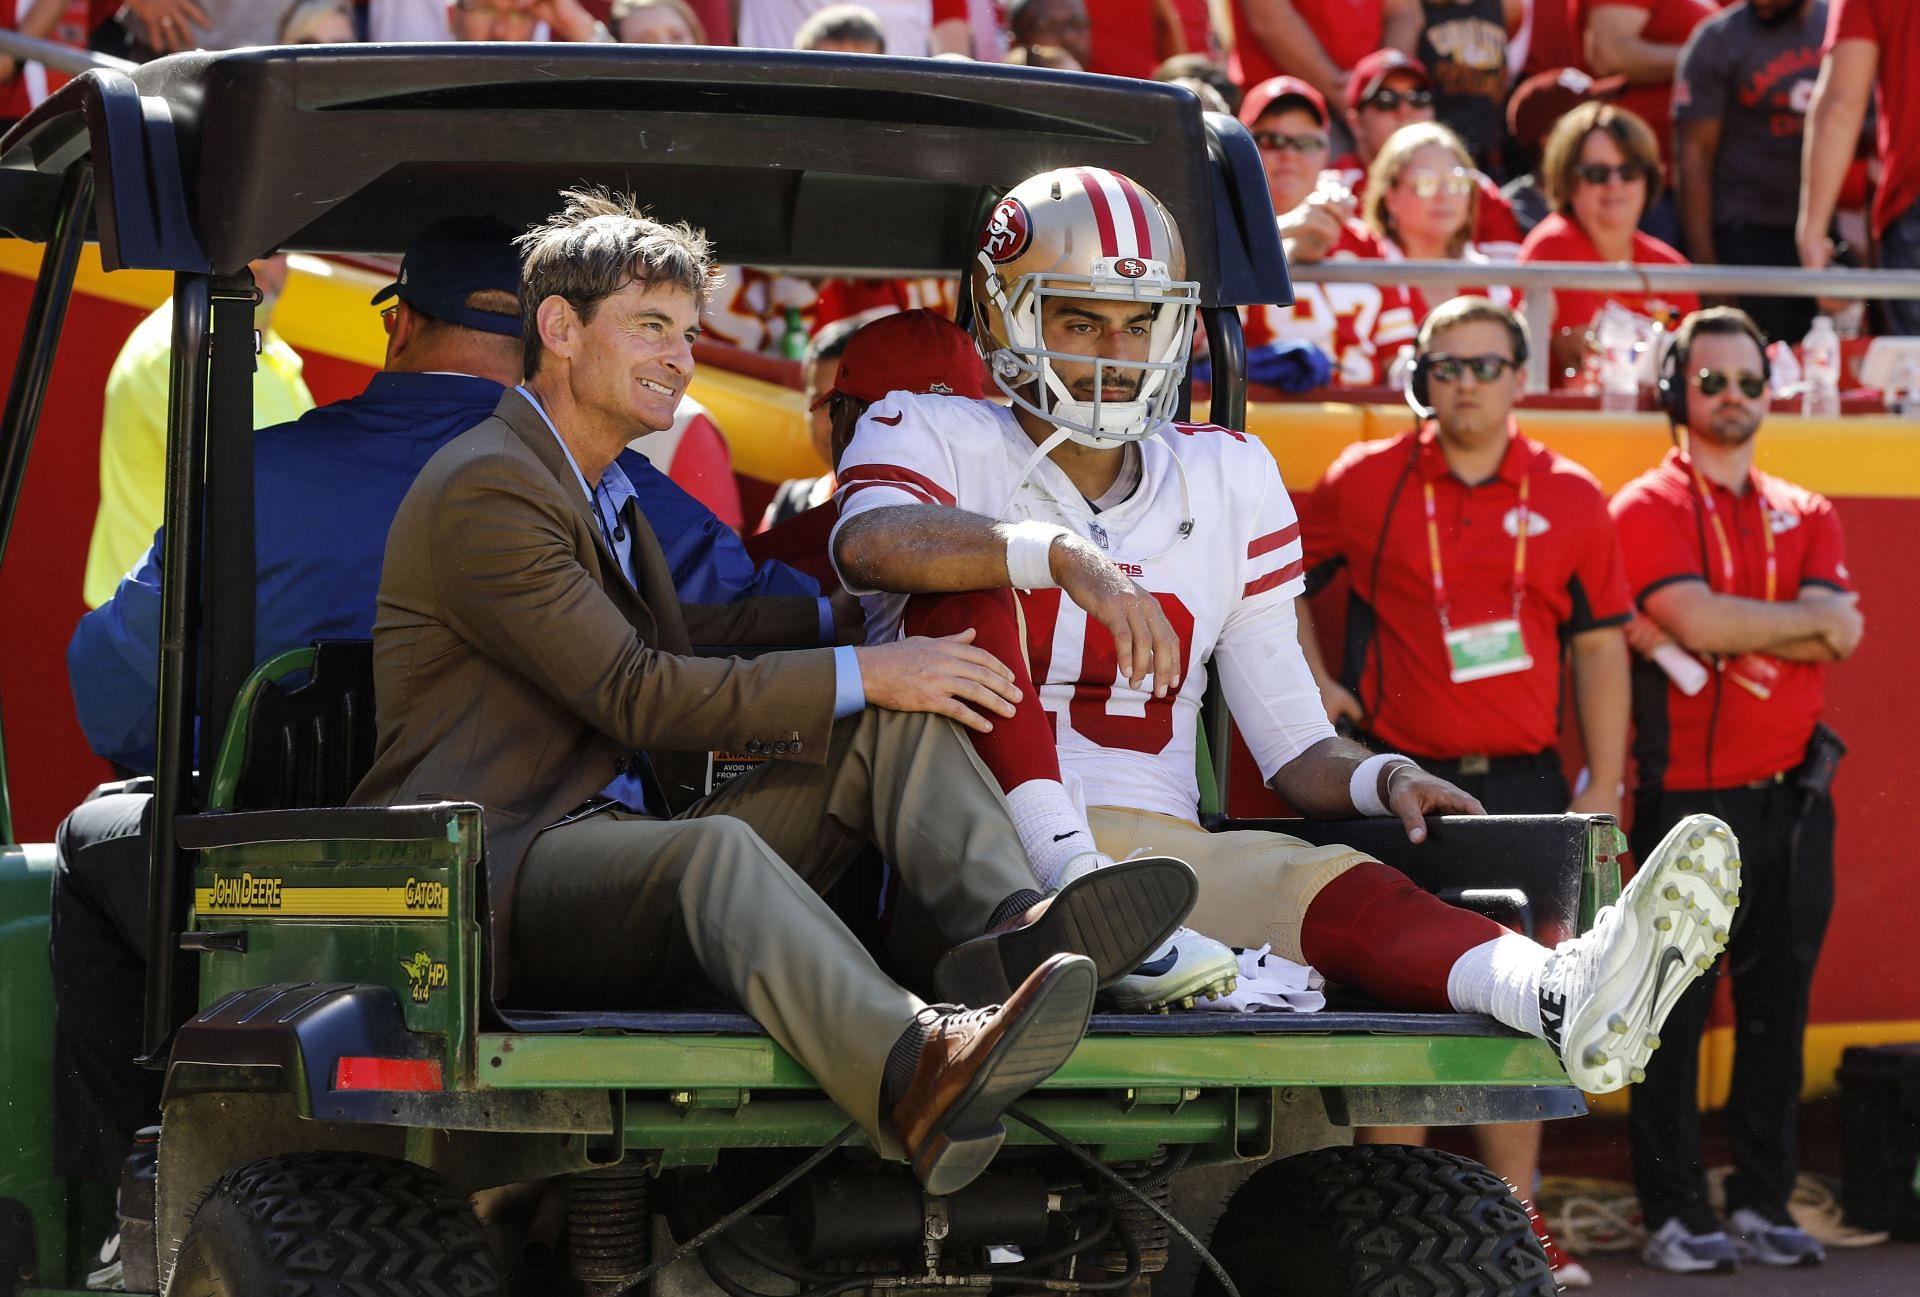 Why is Jimmy Garoppolo not playing today? The 49ers QB's injury status